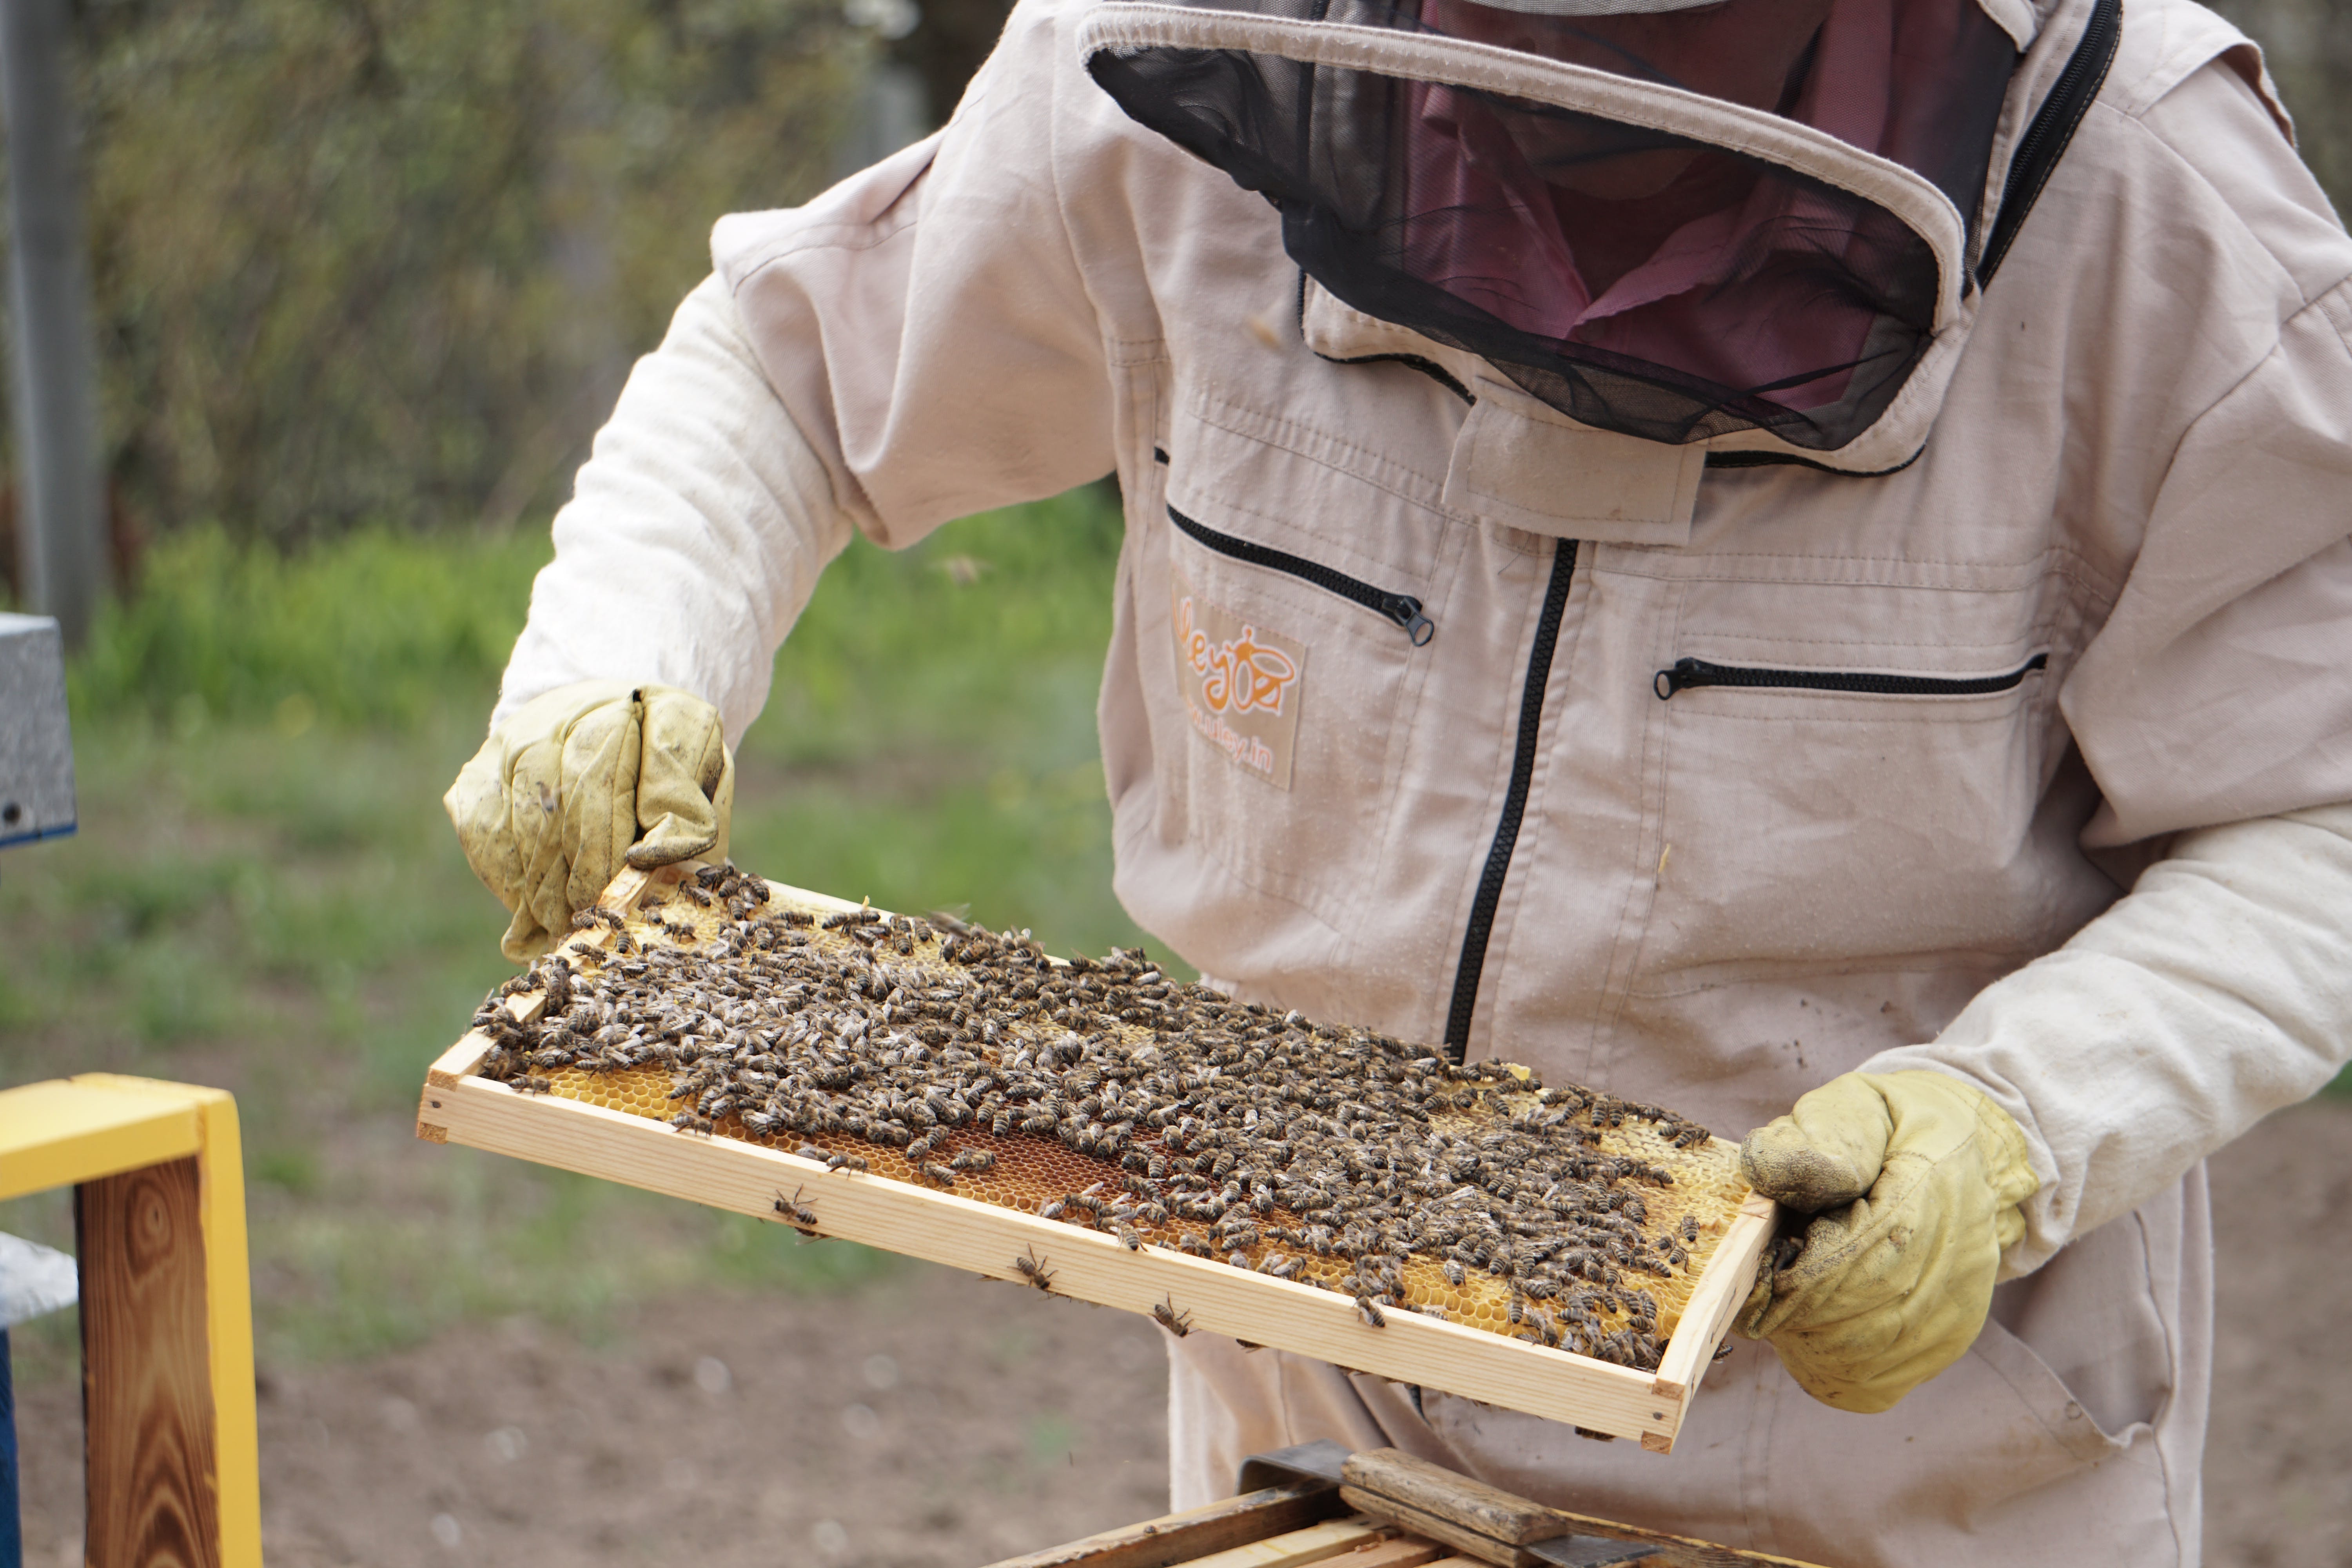 Beekeeper inspecting hive frame full of bees in apiary